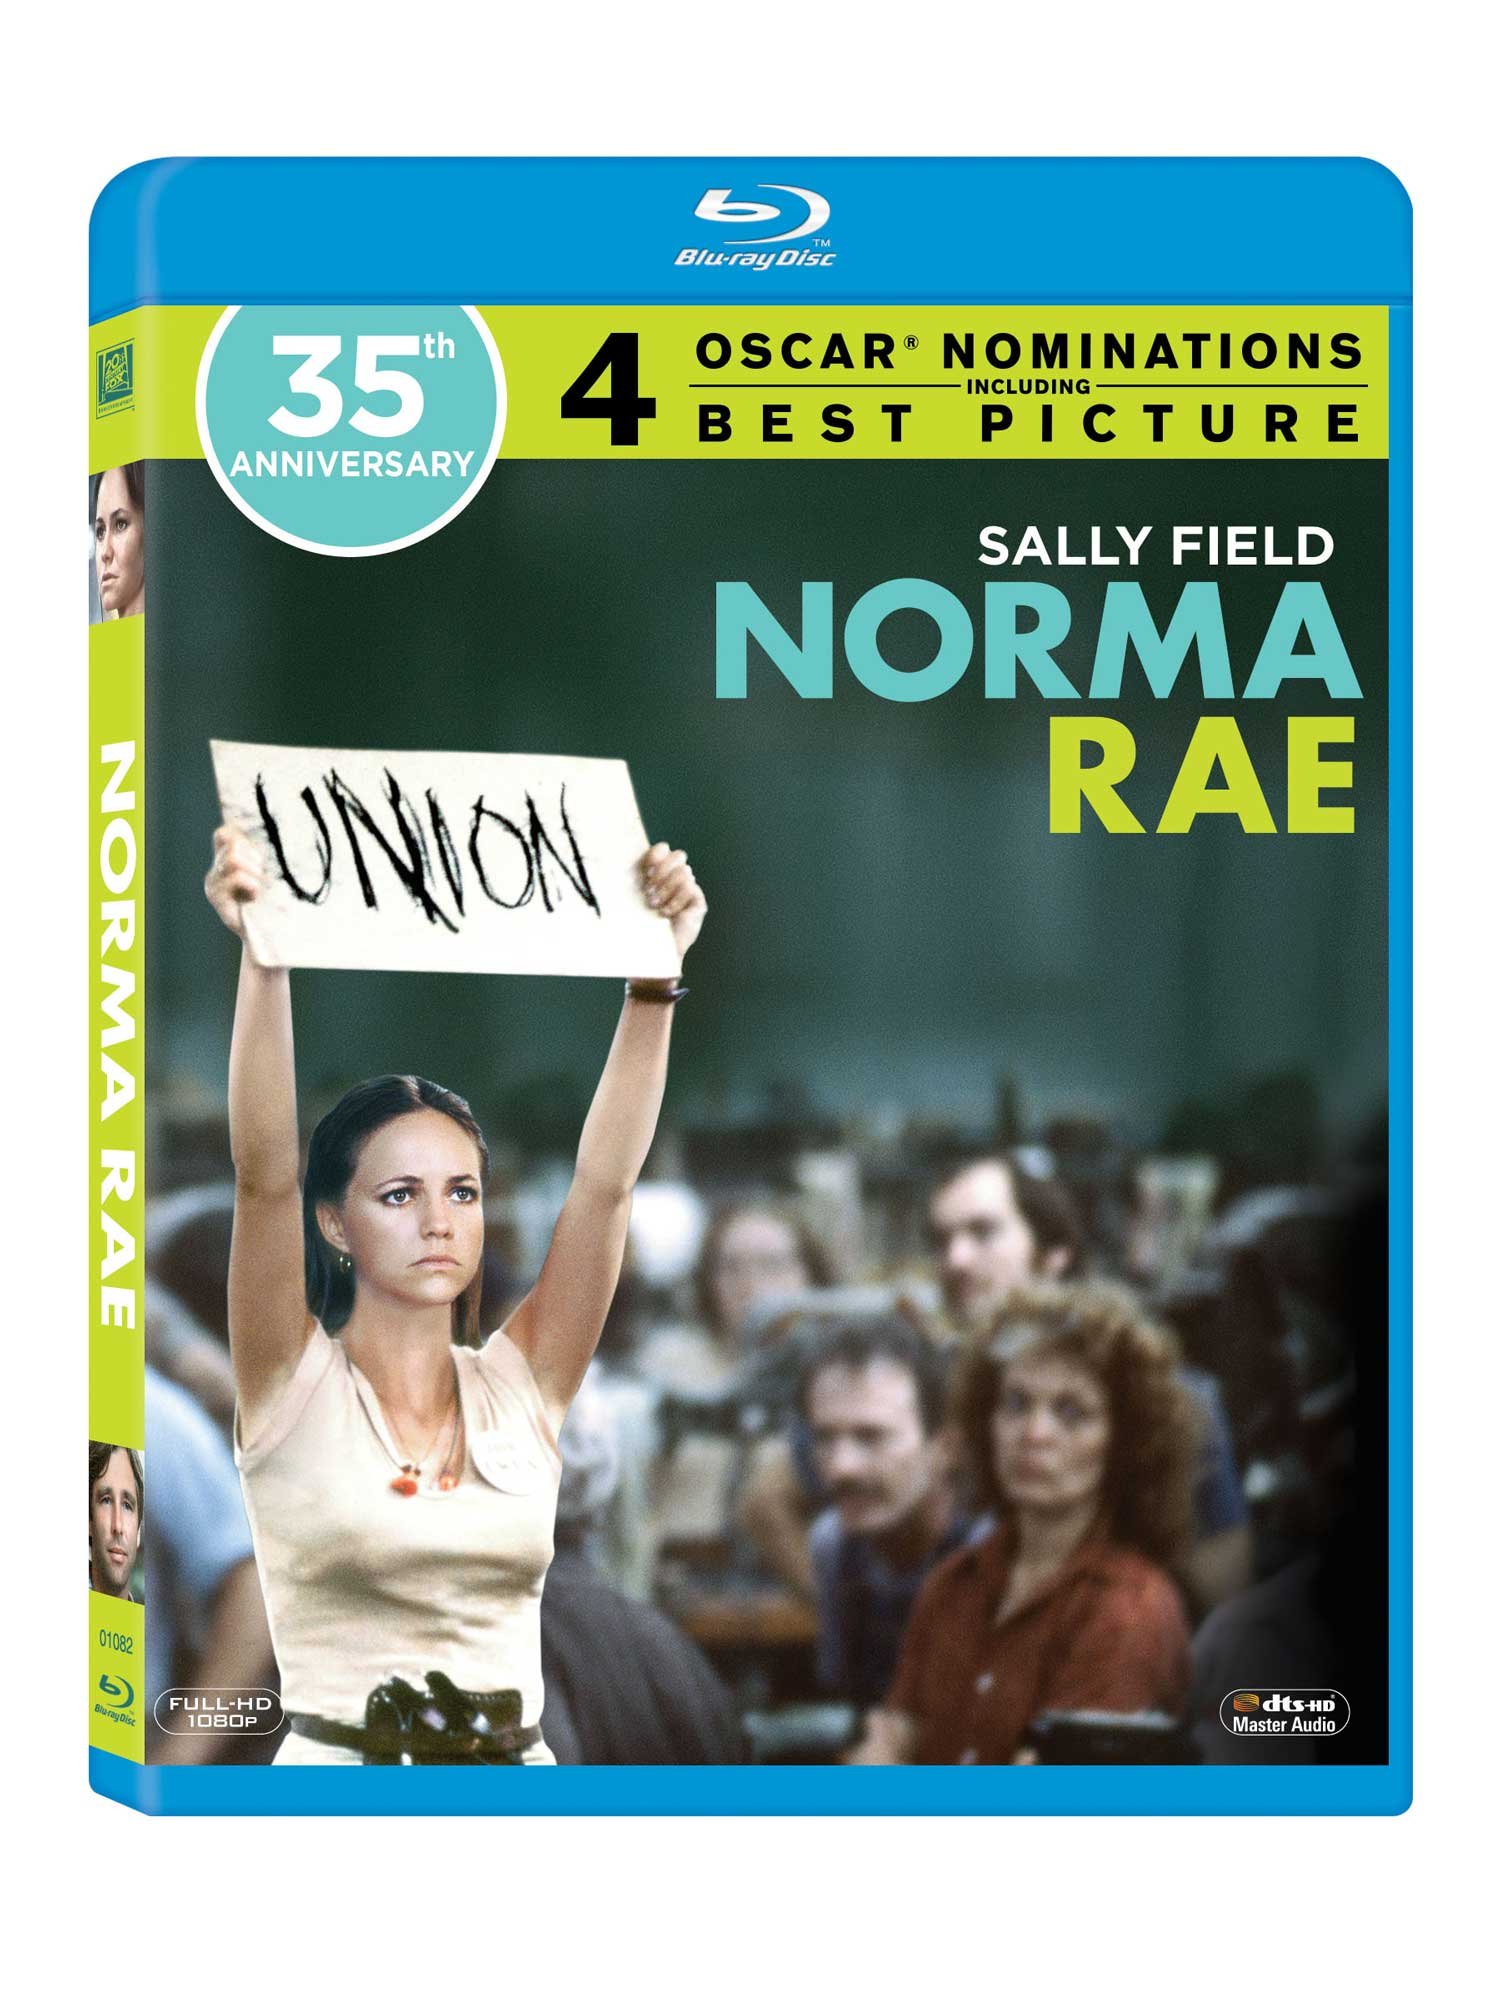 norma-rae-movie-purchase-or-watch-online